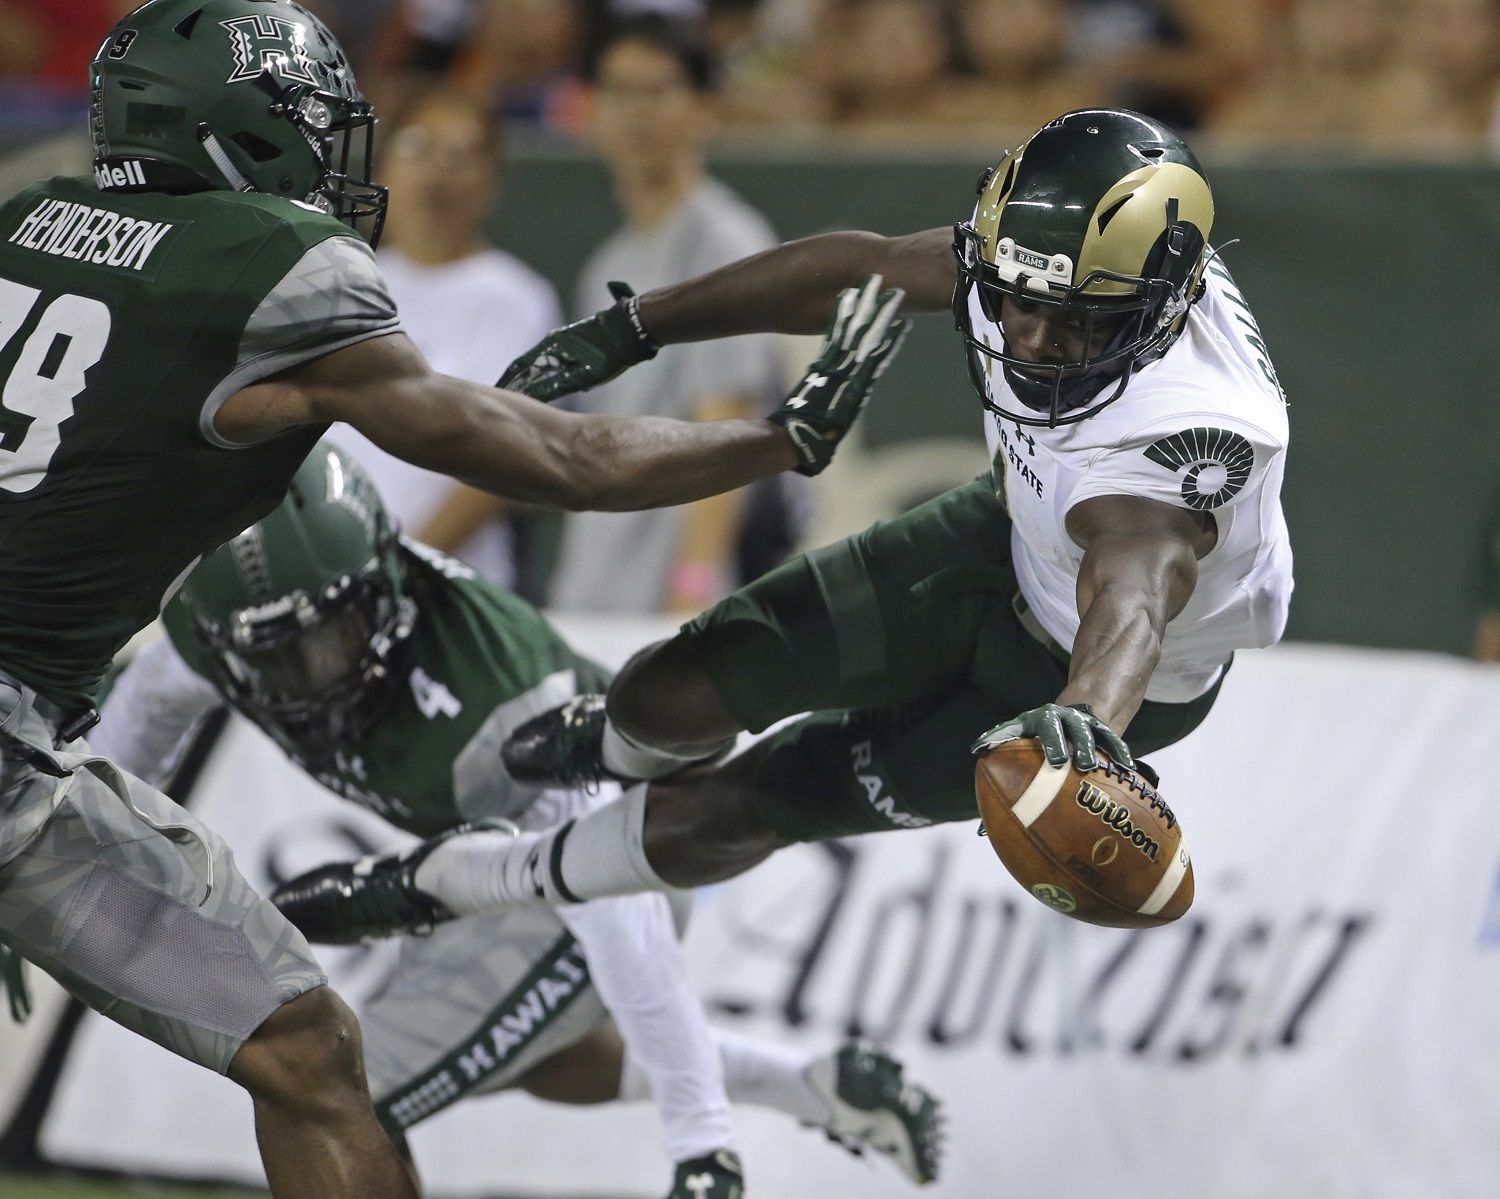 While guarded by Hawaii defensive backs Trayvon Henderson (39) and Daniel Lewis Jr. (4), Colorado State wide receiver Michael Gallup (4) tries to leap into the end zone but stepped out of bounds during the second quarter of the NCAA college football game against Hawaii, Saturday, Sept. 30, 2017, in Honolulu. (AP Photo/Marco Garcia)